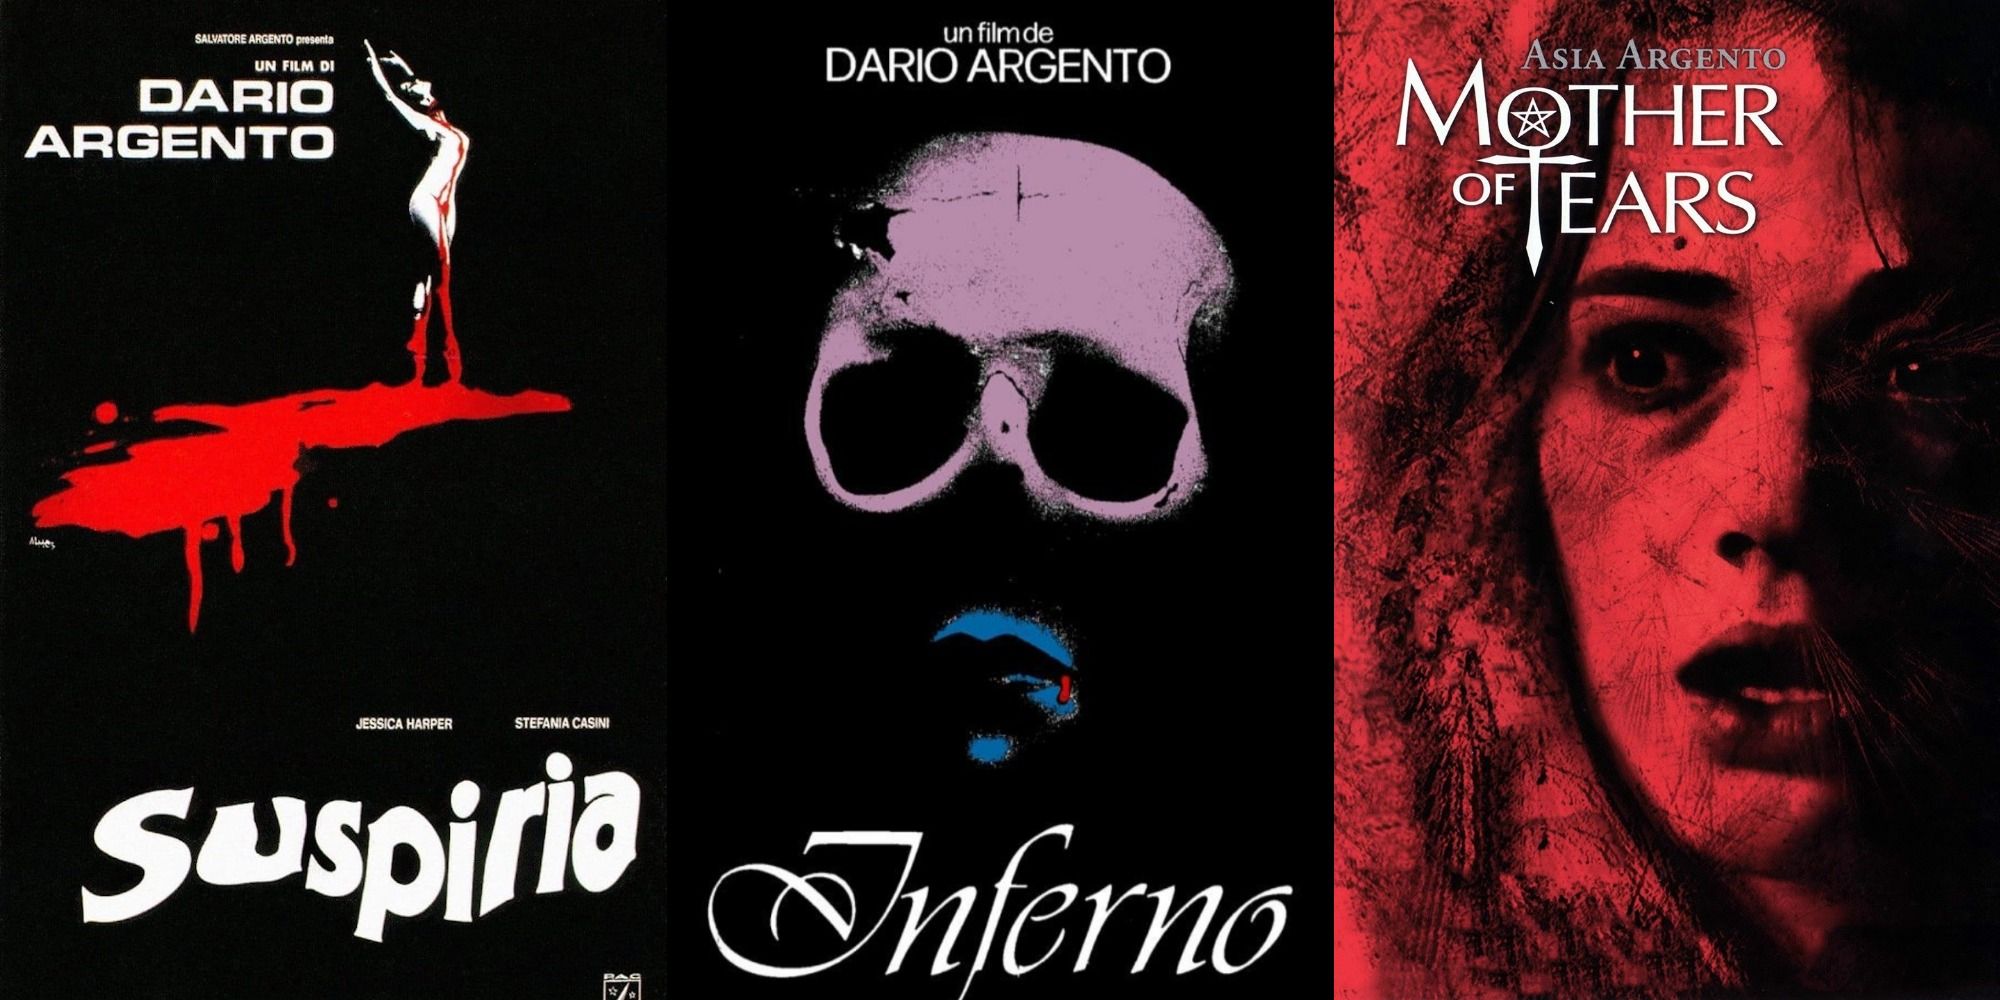 combined posters for Italian horror films Suspiria, Inferno, Mother of Tears with abstract imagery